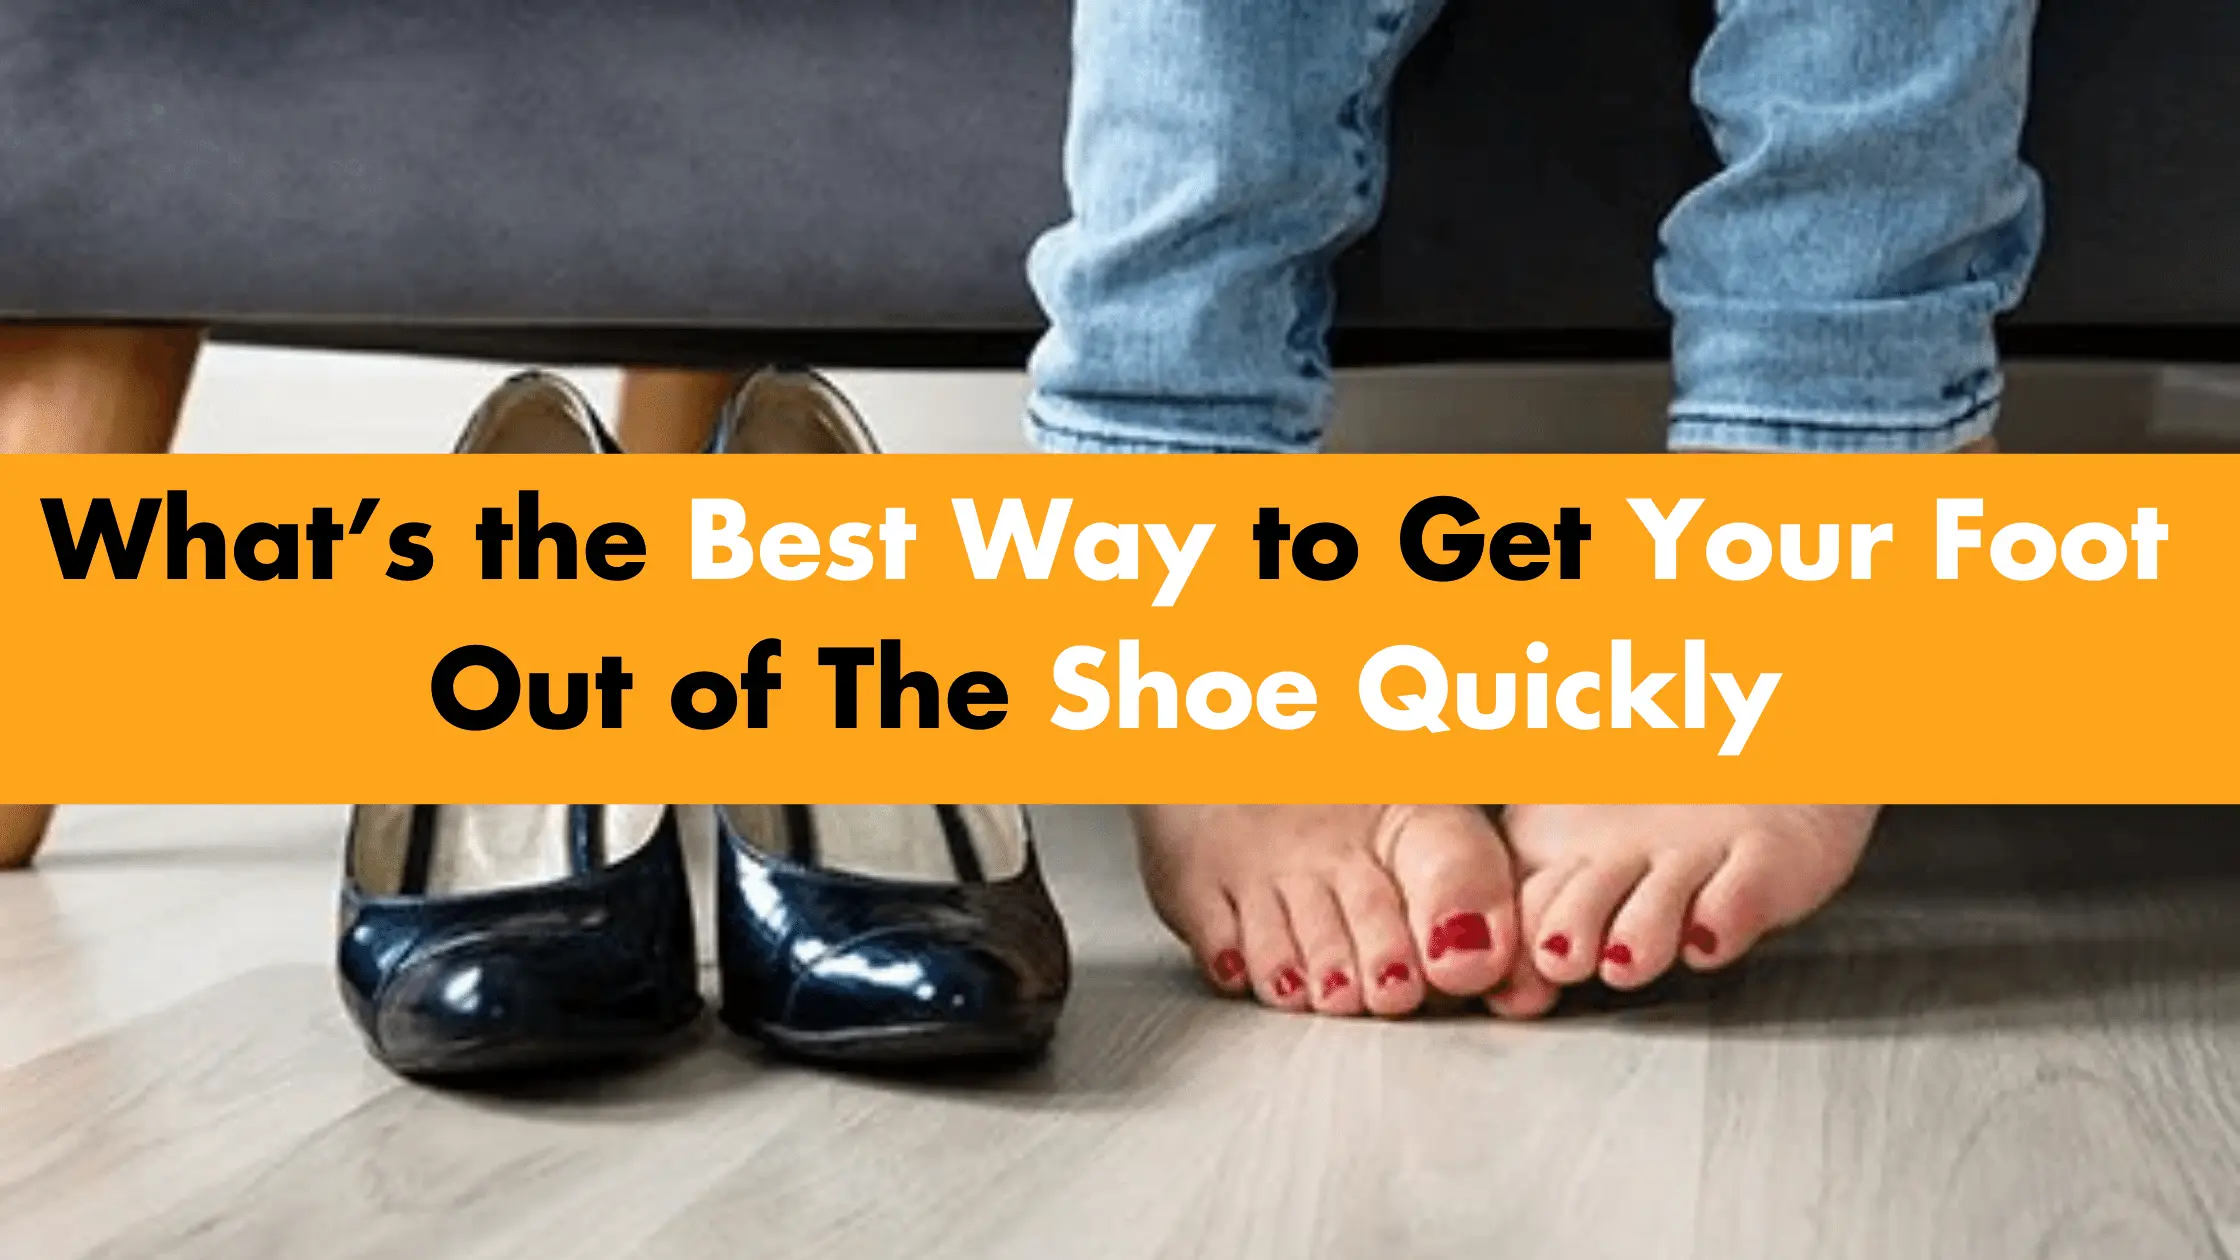 What’s the Best Way to Get Your Foot out of the Shoe Quickly? 